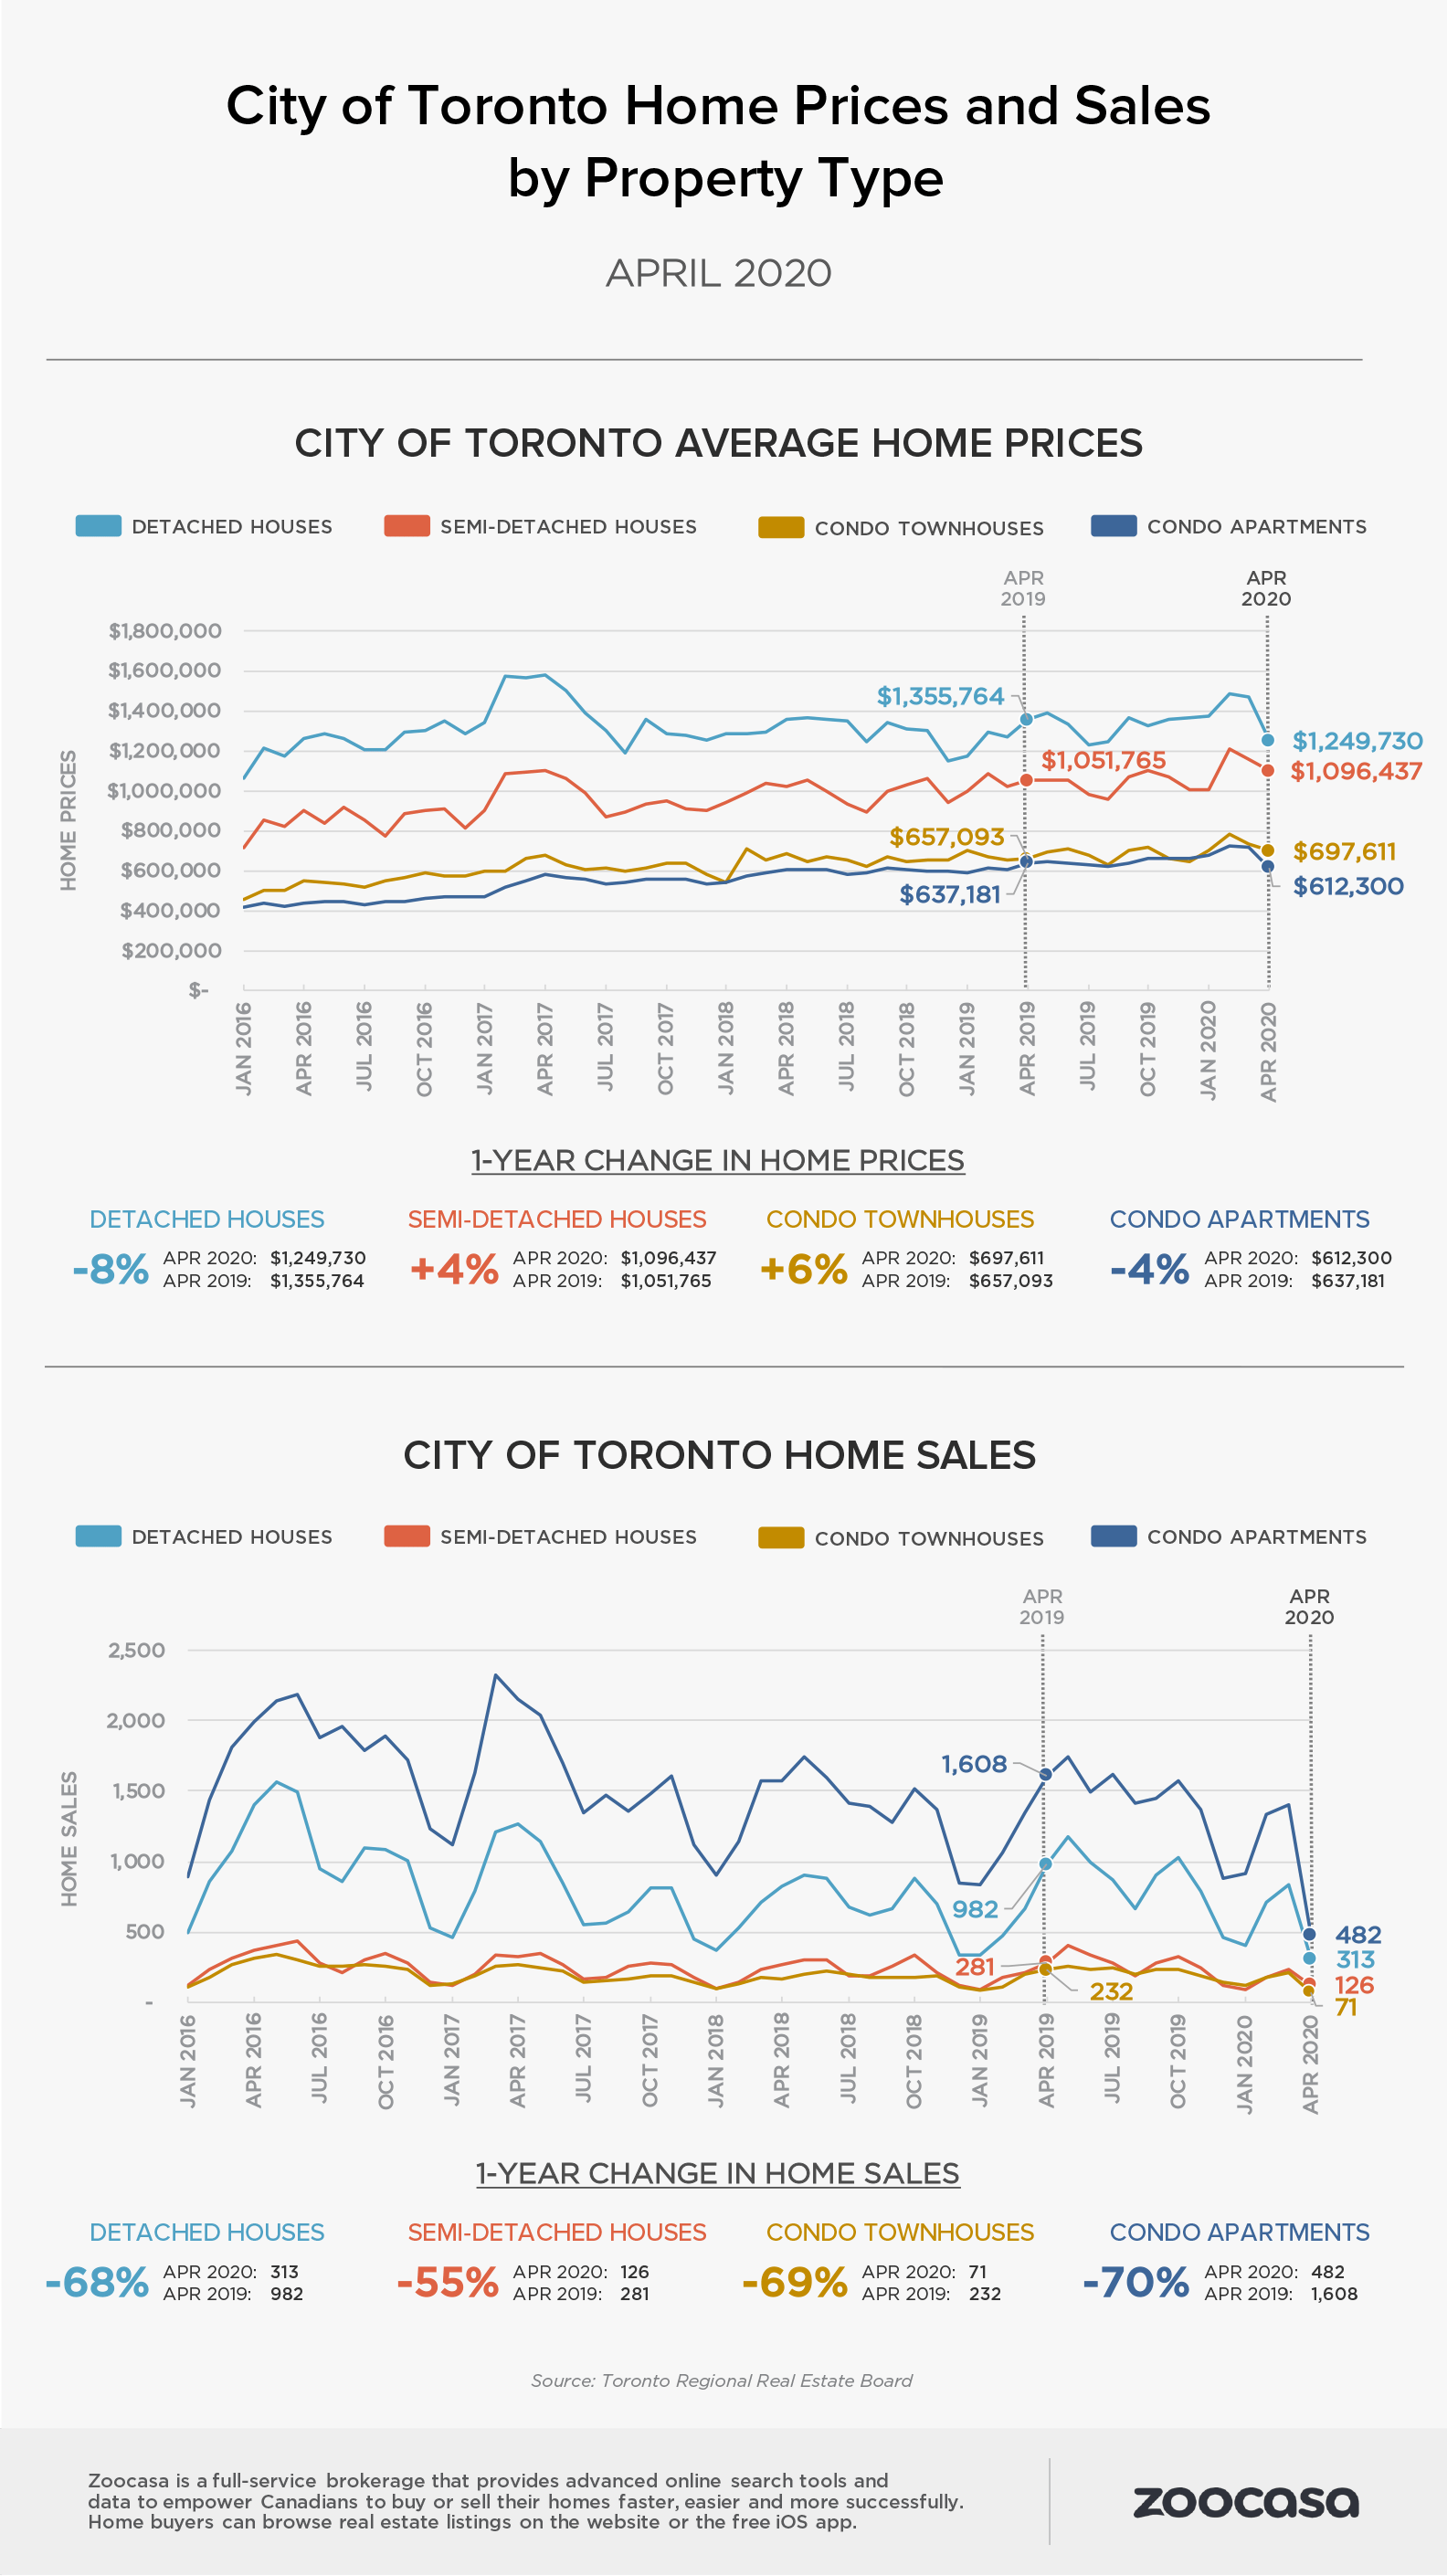 City of Toronto Home Sales and Prices - April 2020